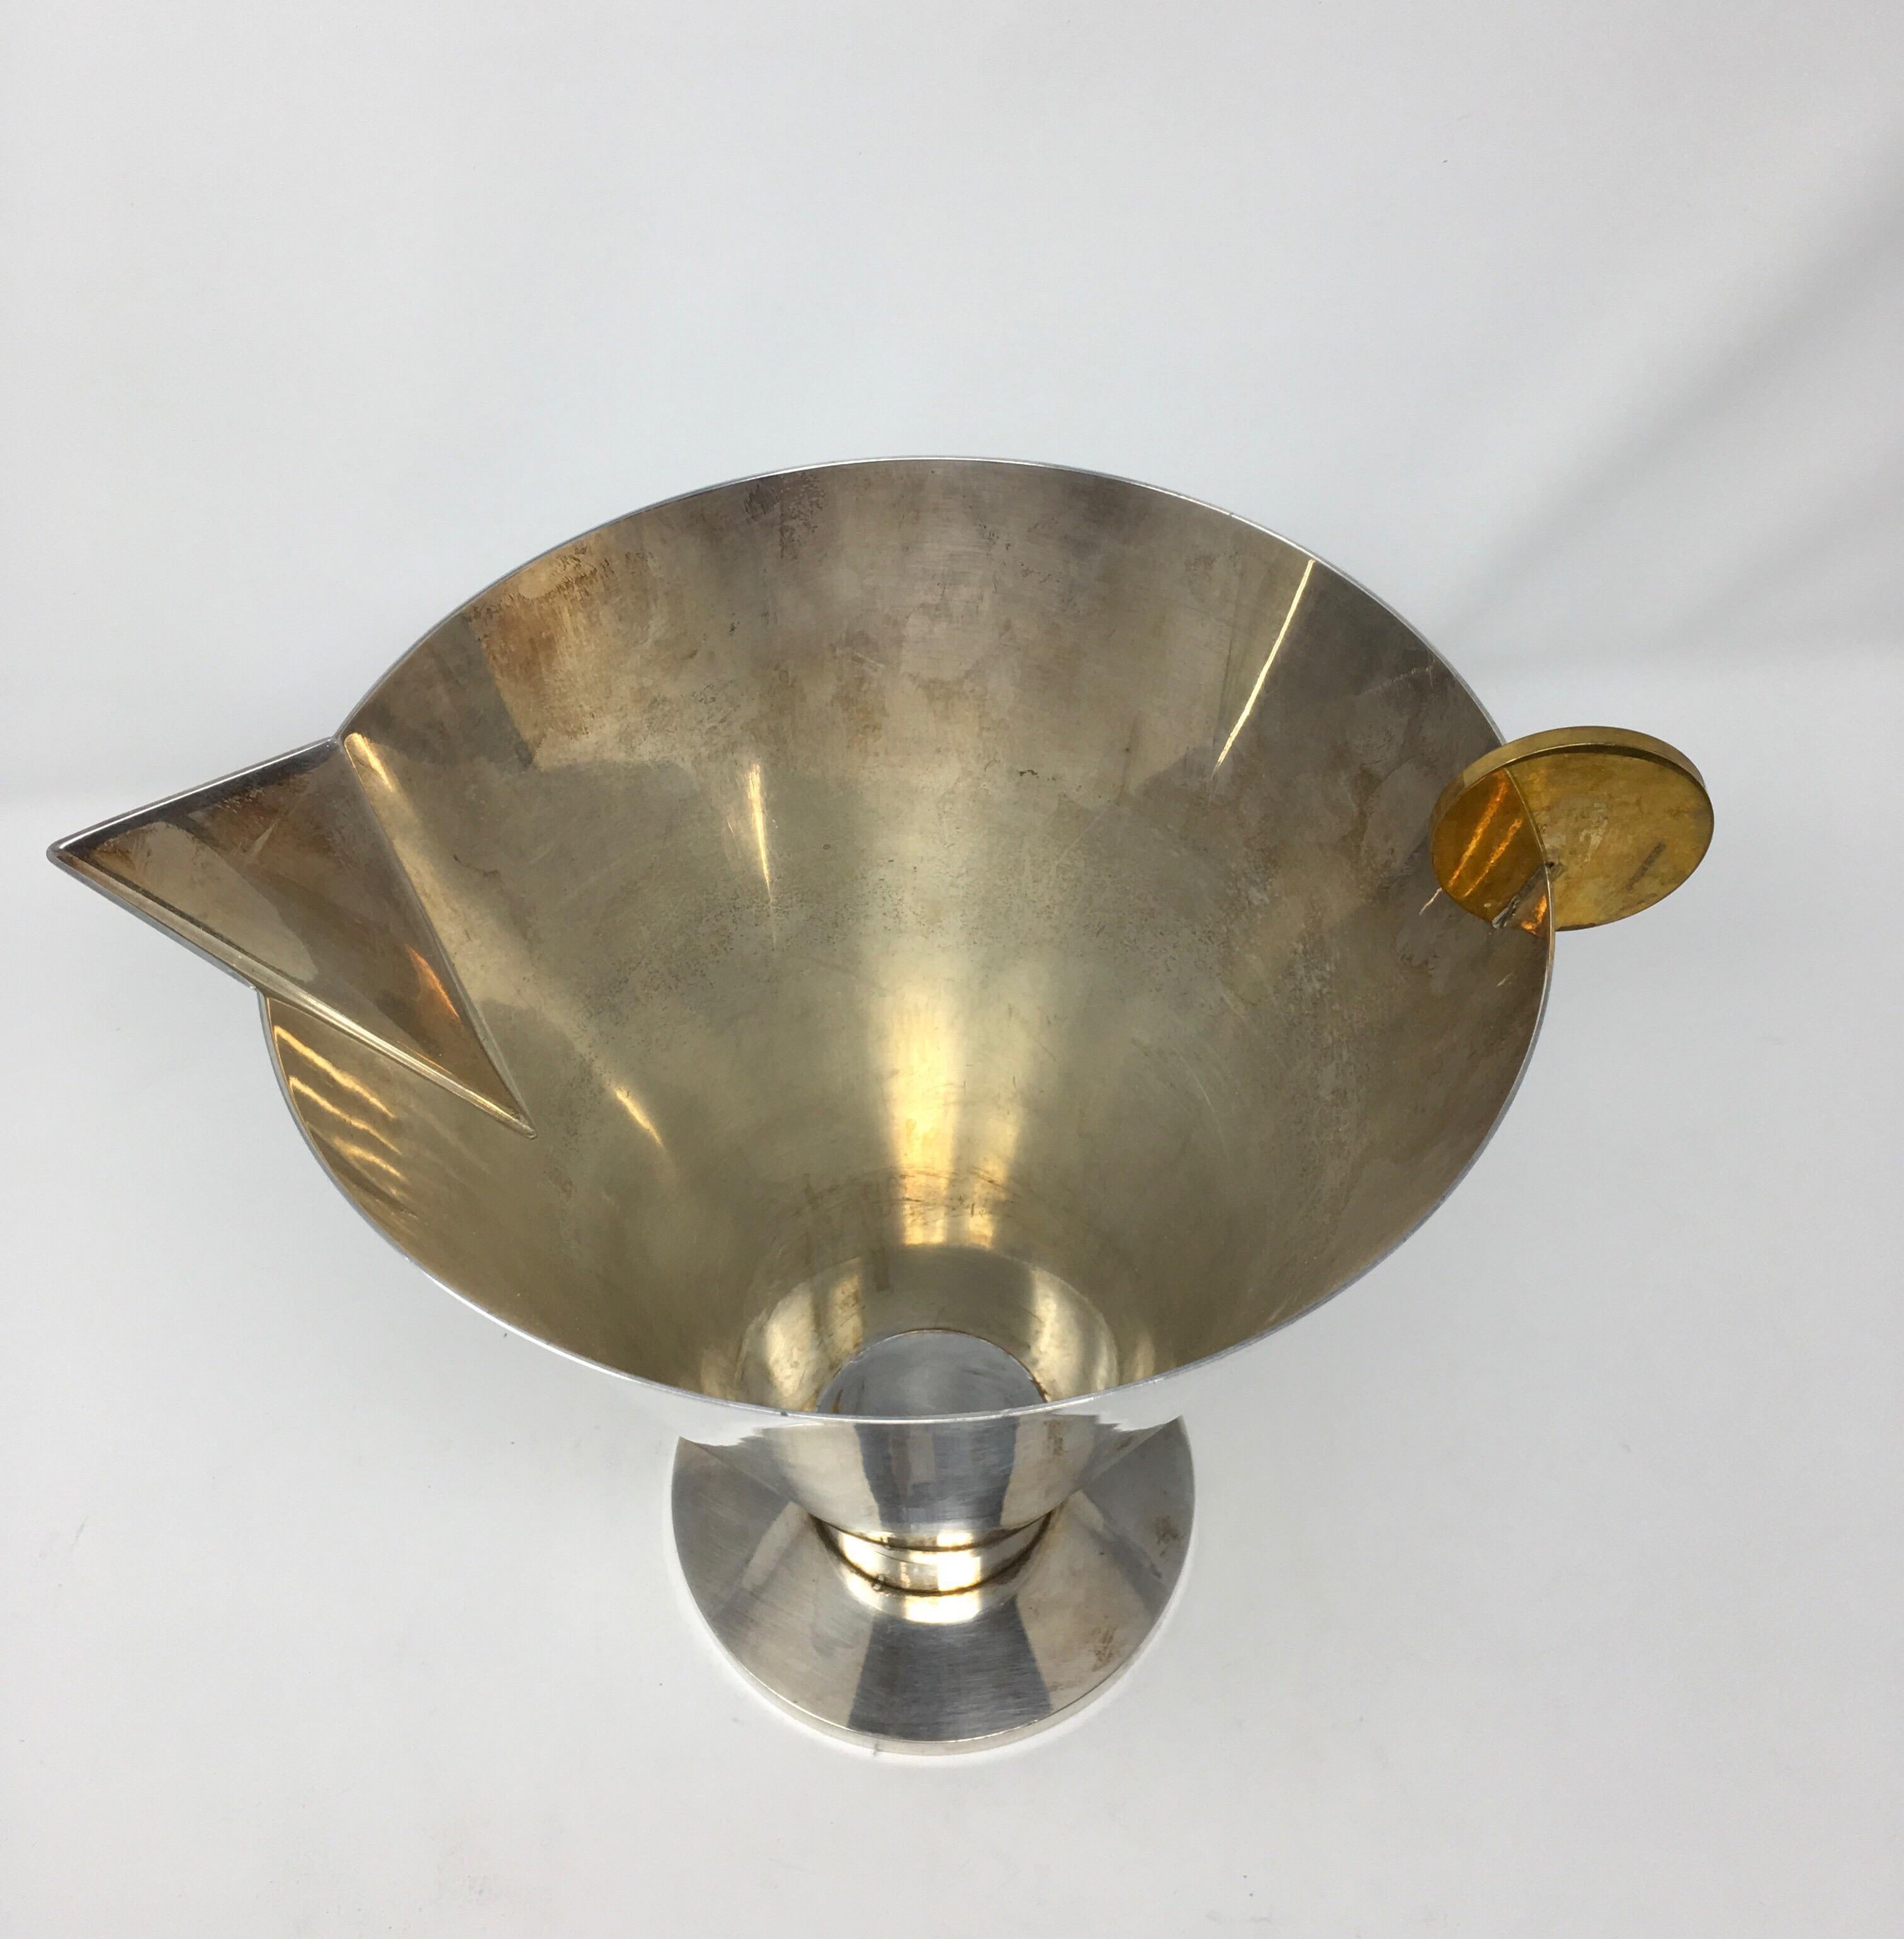 This is a Mid-Century Modern cocktail pitcher designed by Ambrogio Pozzi. The pitcher is made of silver plate with a brass circle attached to the rim. Ambrogio Pozzi was born in Varese, Italy. In 1951 Pozzi started designing and designed this piece